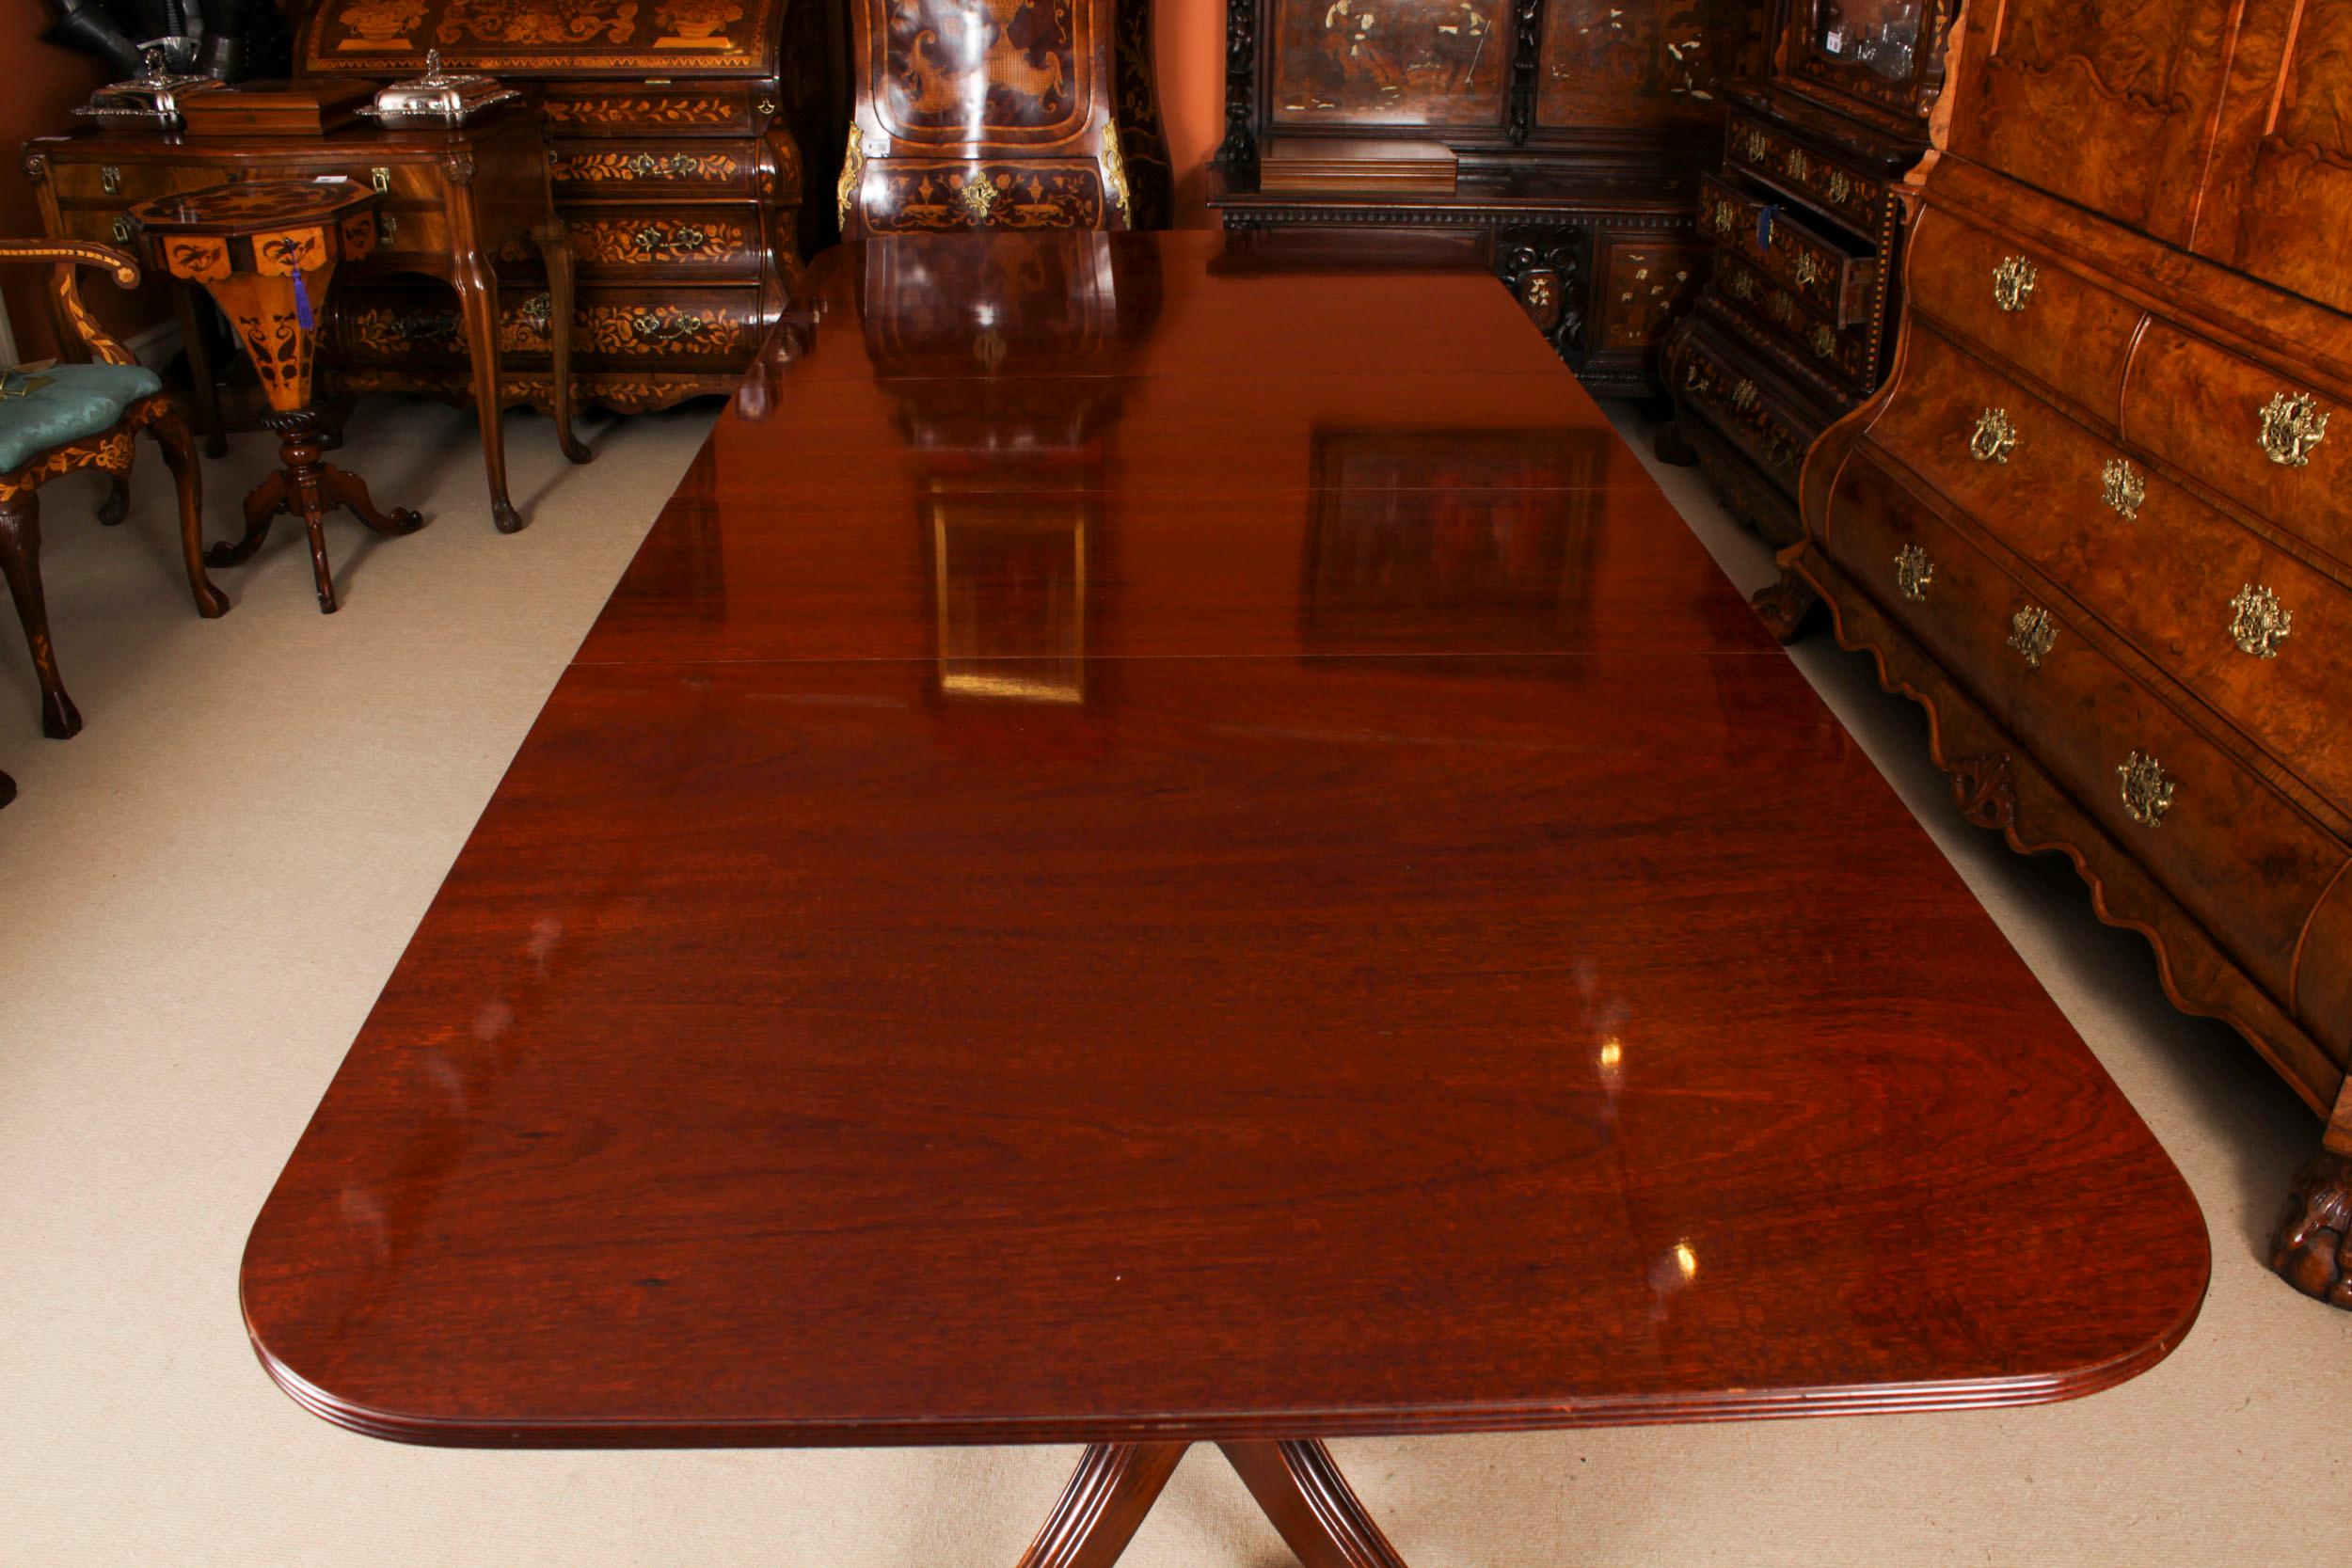 Mahogany Vintage Regency Revival Dining Table and 10 Chairs by William Tillman 20th C